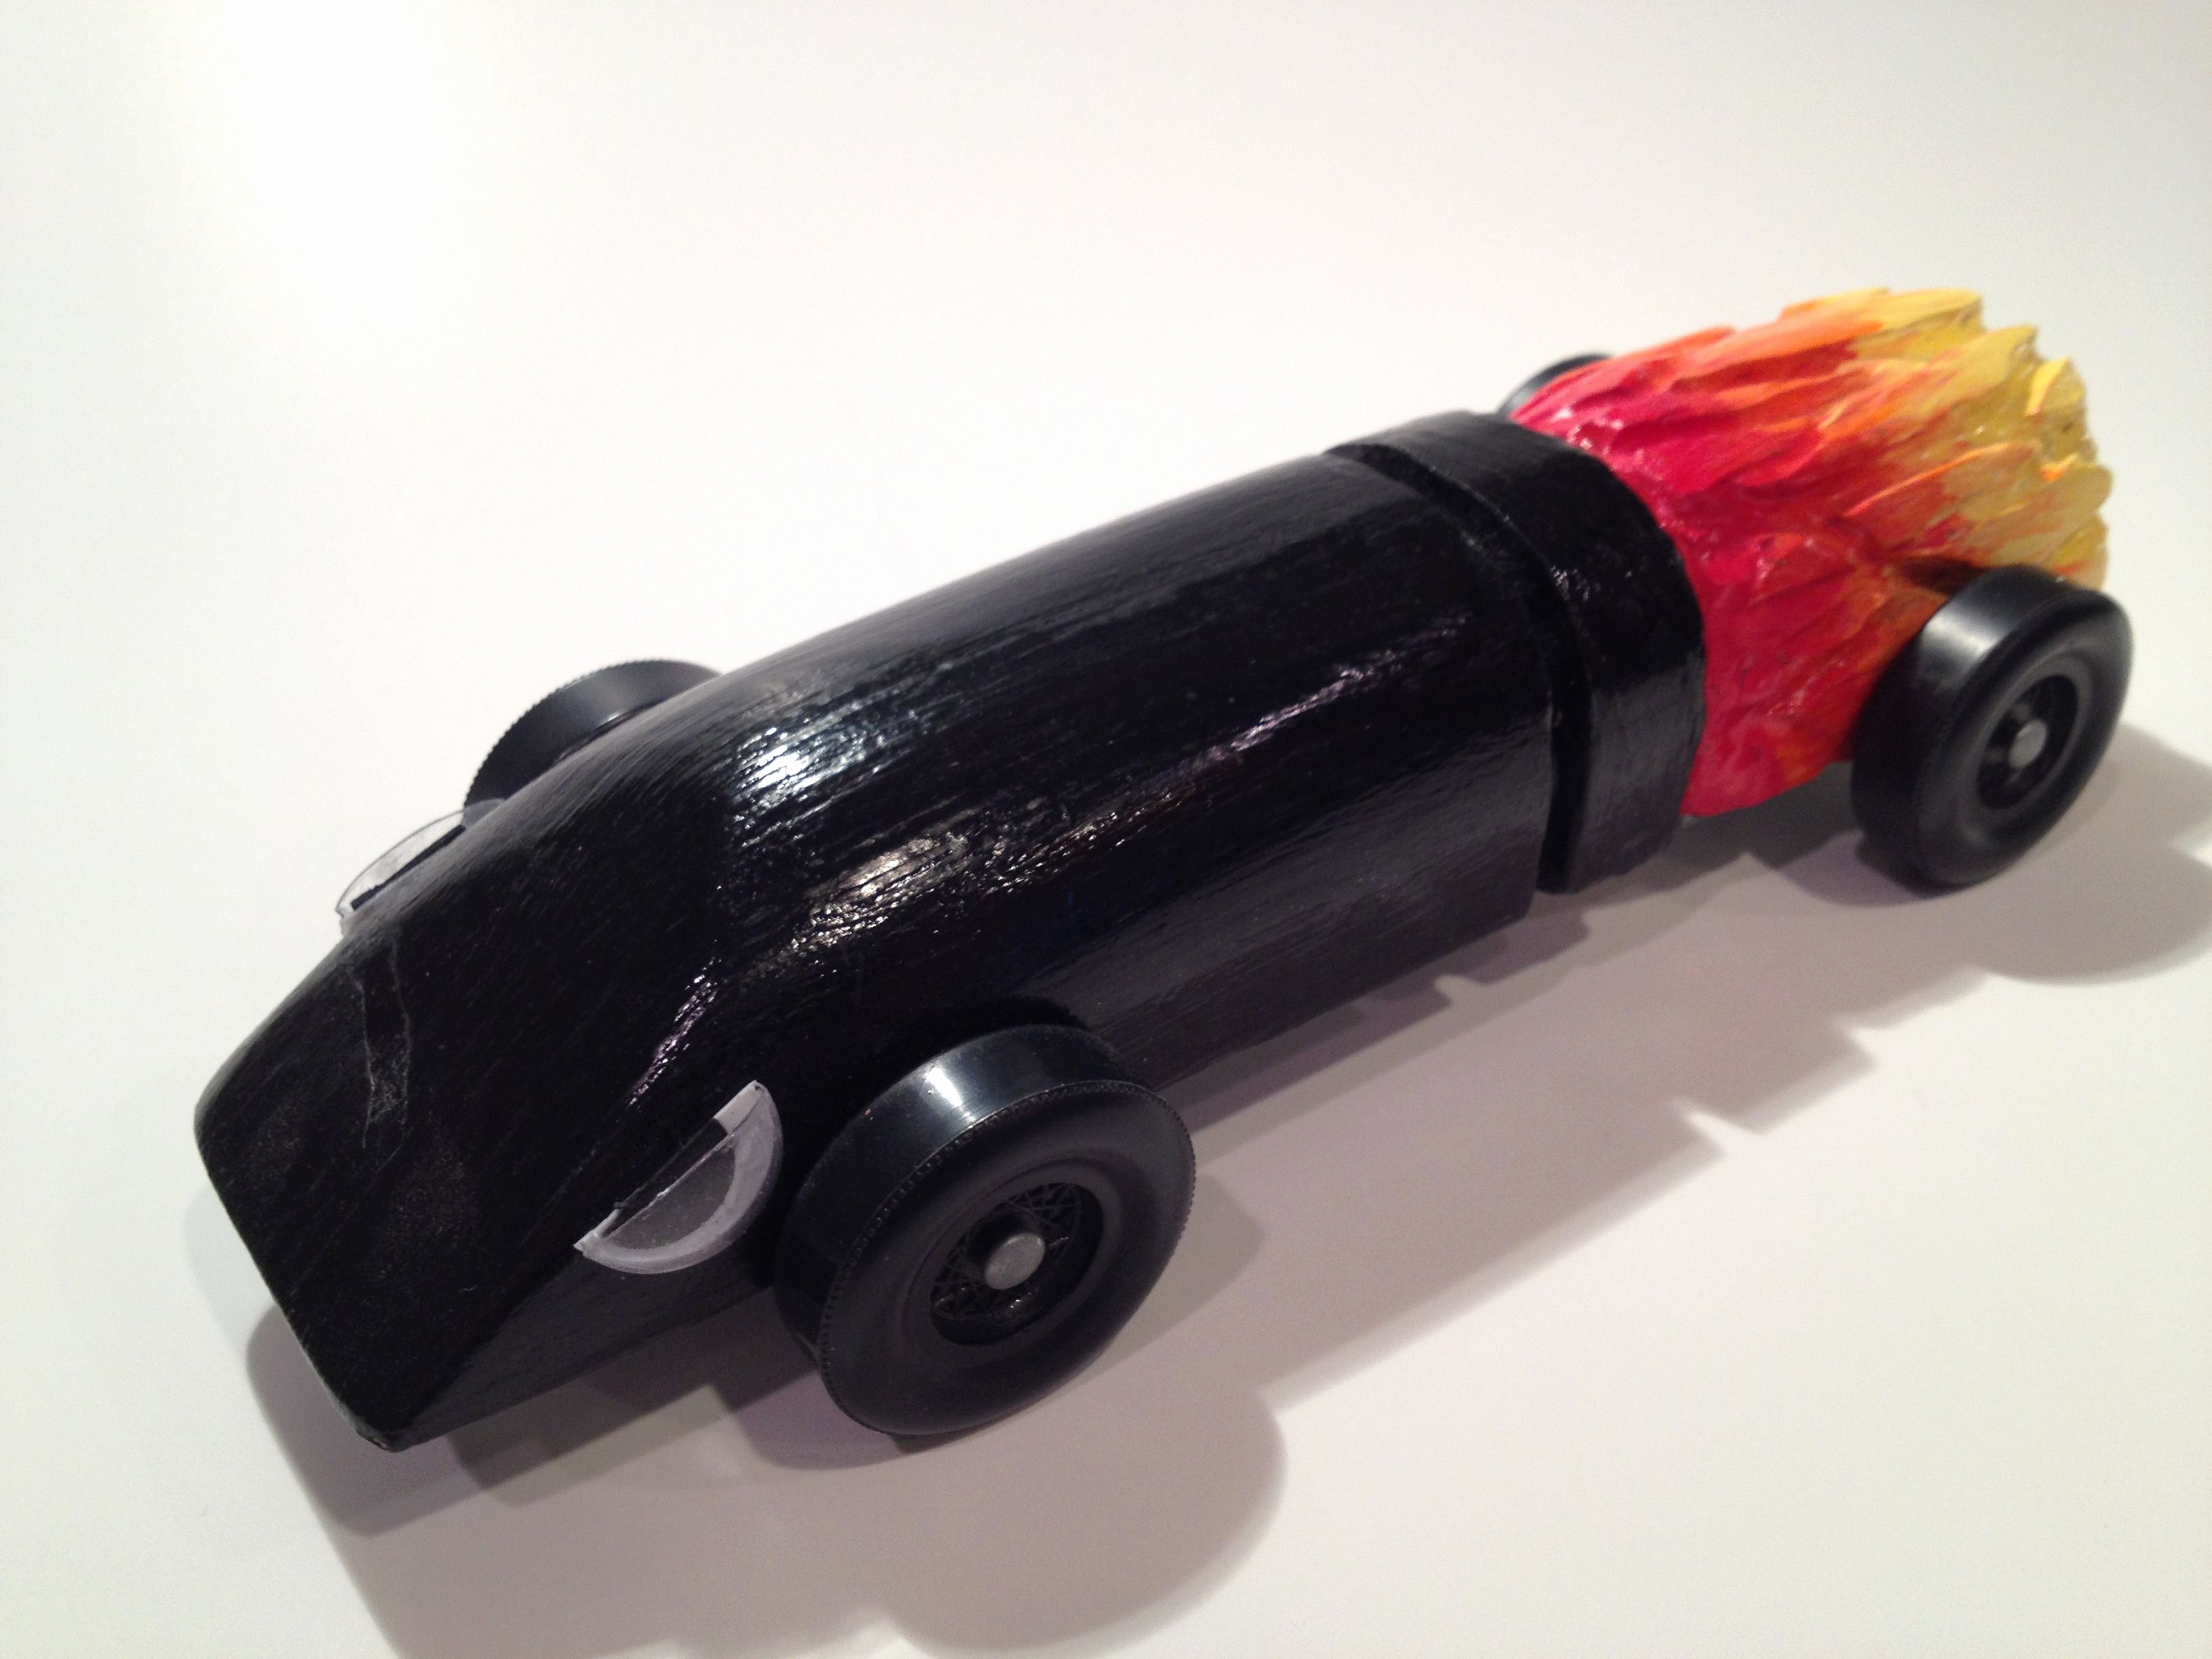 Mario Pinewood Derby Car Inspirational the Bullet Bill Car Mario Bros Won Second Place for